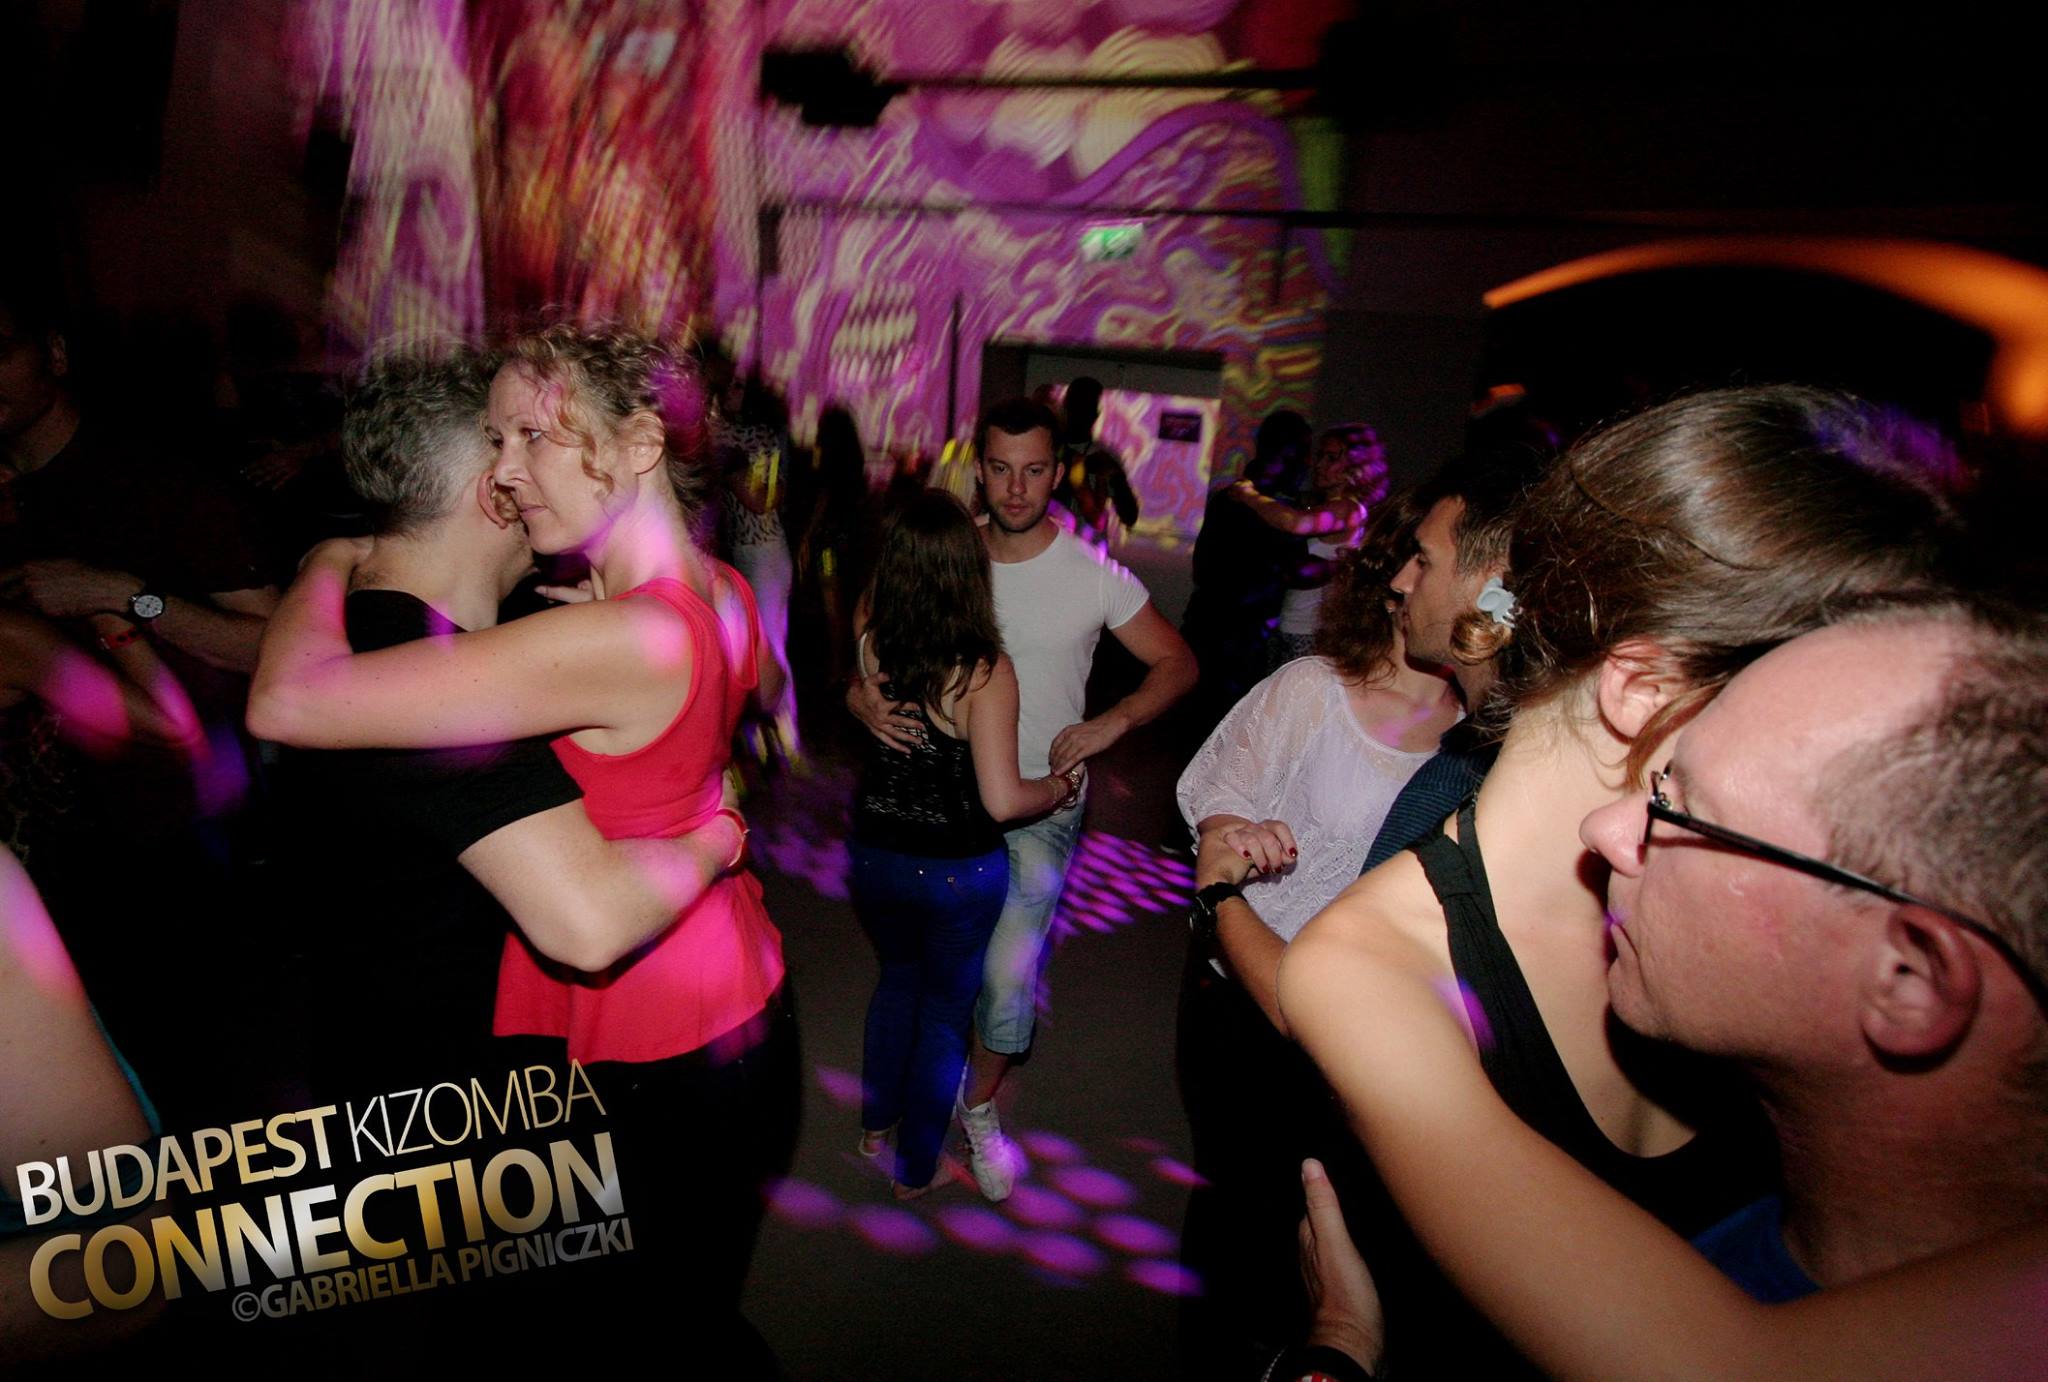 Couples dancing at the Budapest Kizomba Connection Festival, August 2015.  photo taken from the BKC Facebook page.